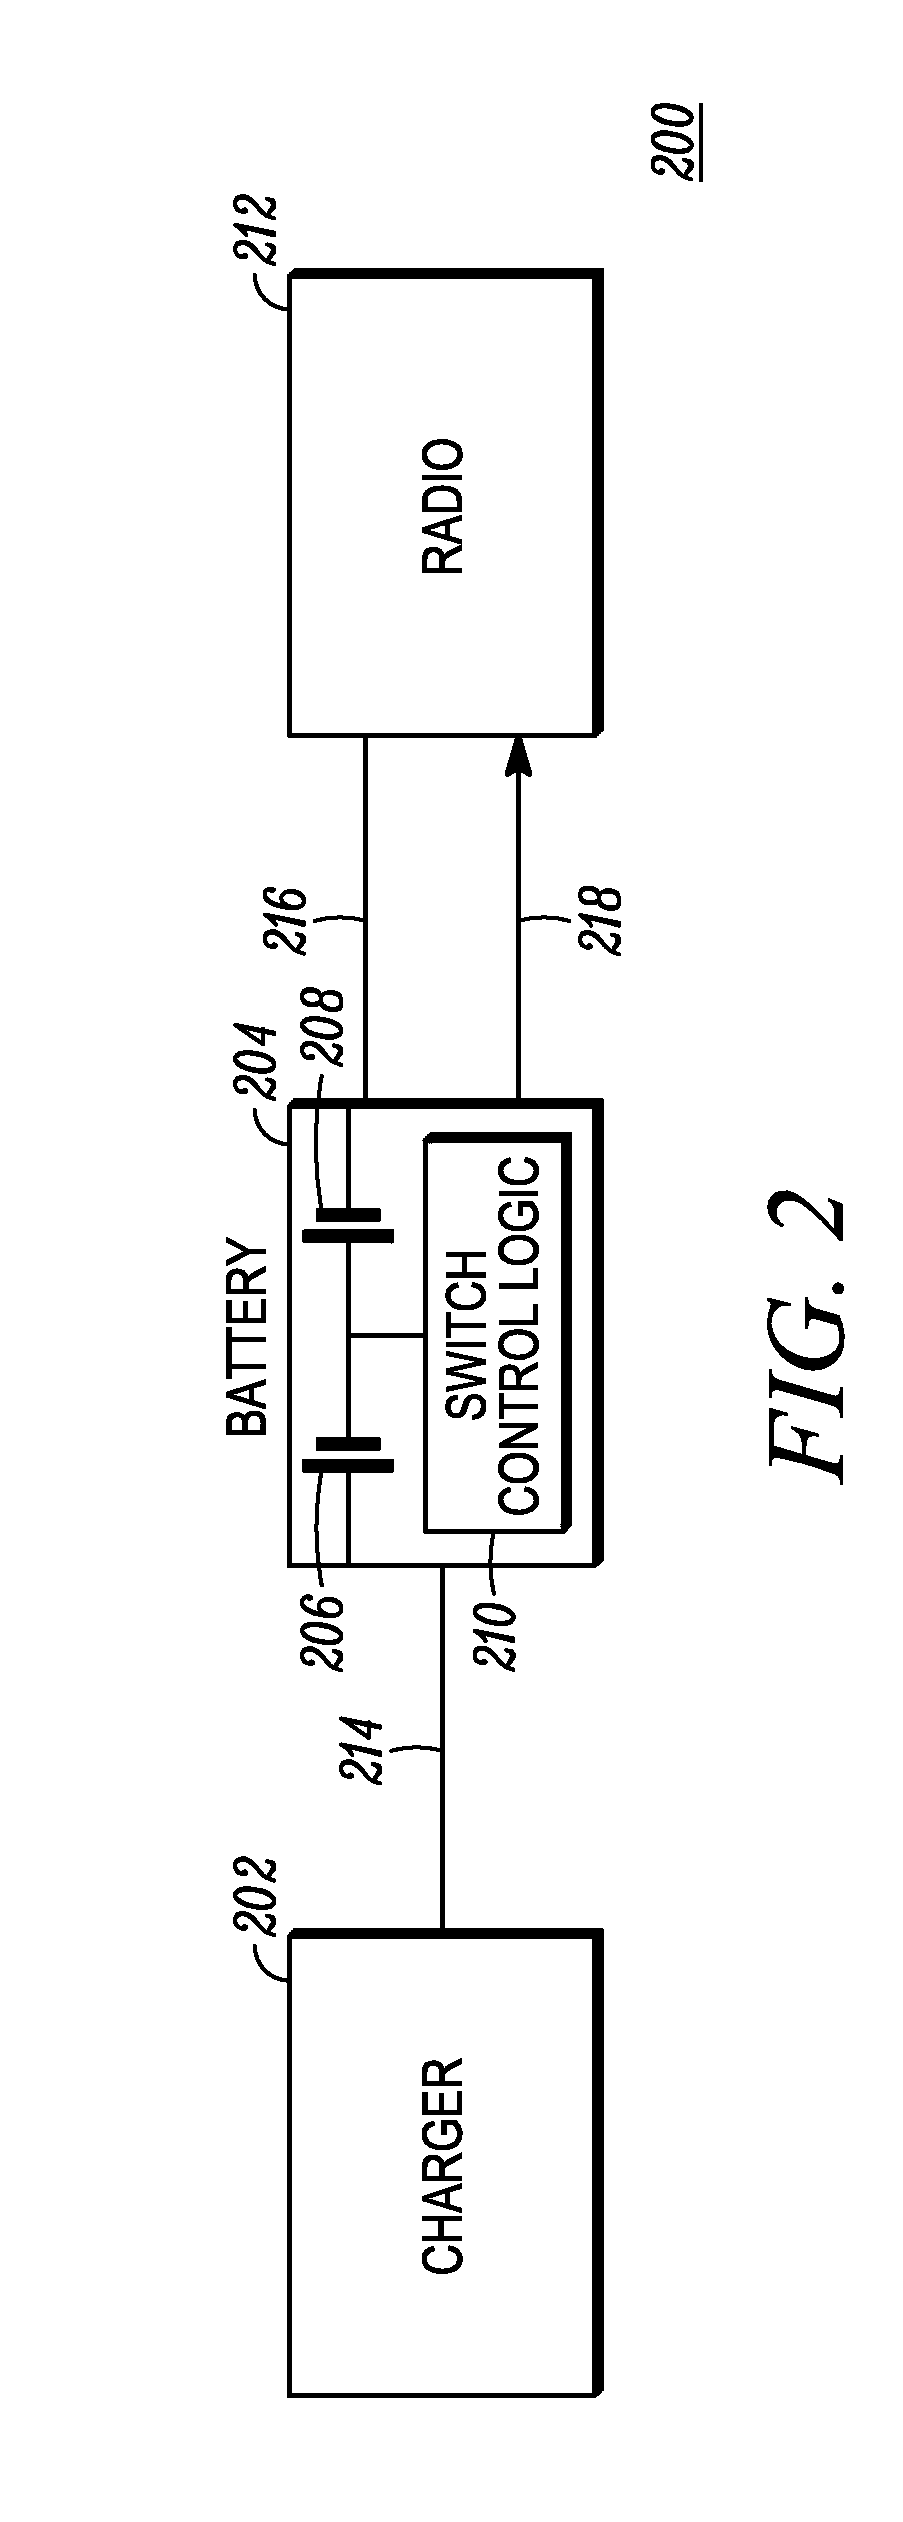 Method and apparatus for adapting a battery voltage